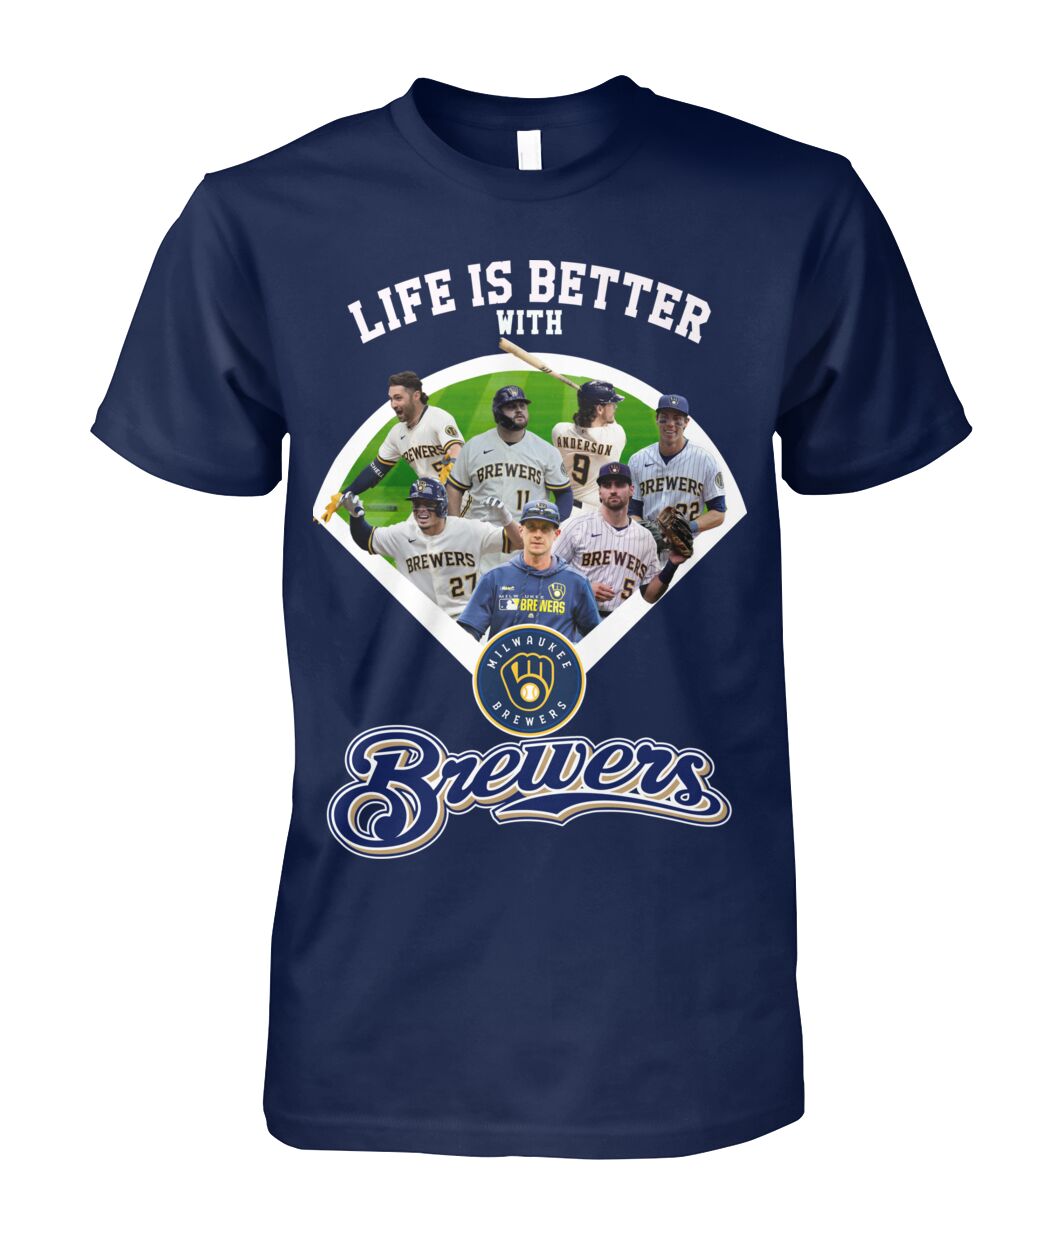 life is better with milwaukee brewers shirt 3490 4LcDl